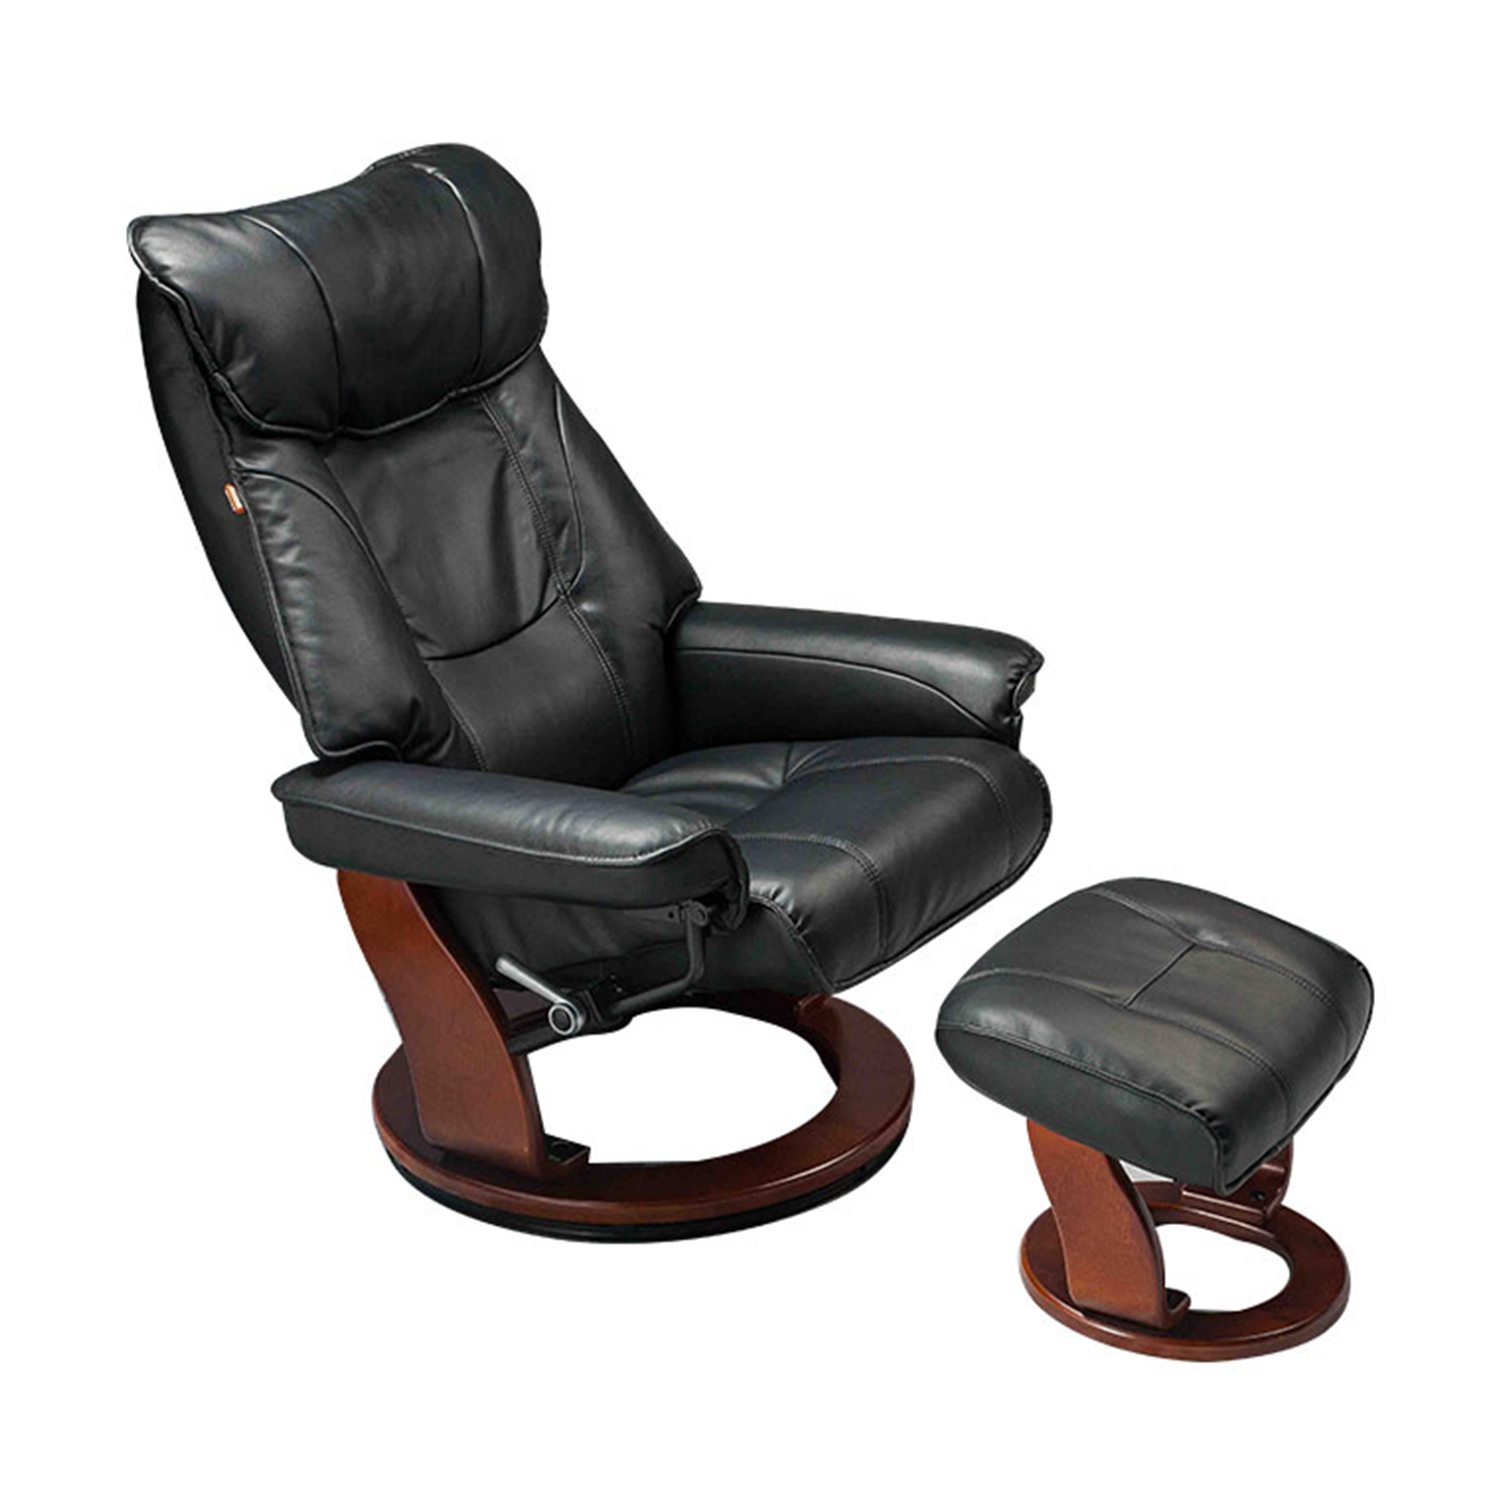 Black Leatherette Recliner Chair With Foot Rest